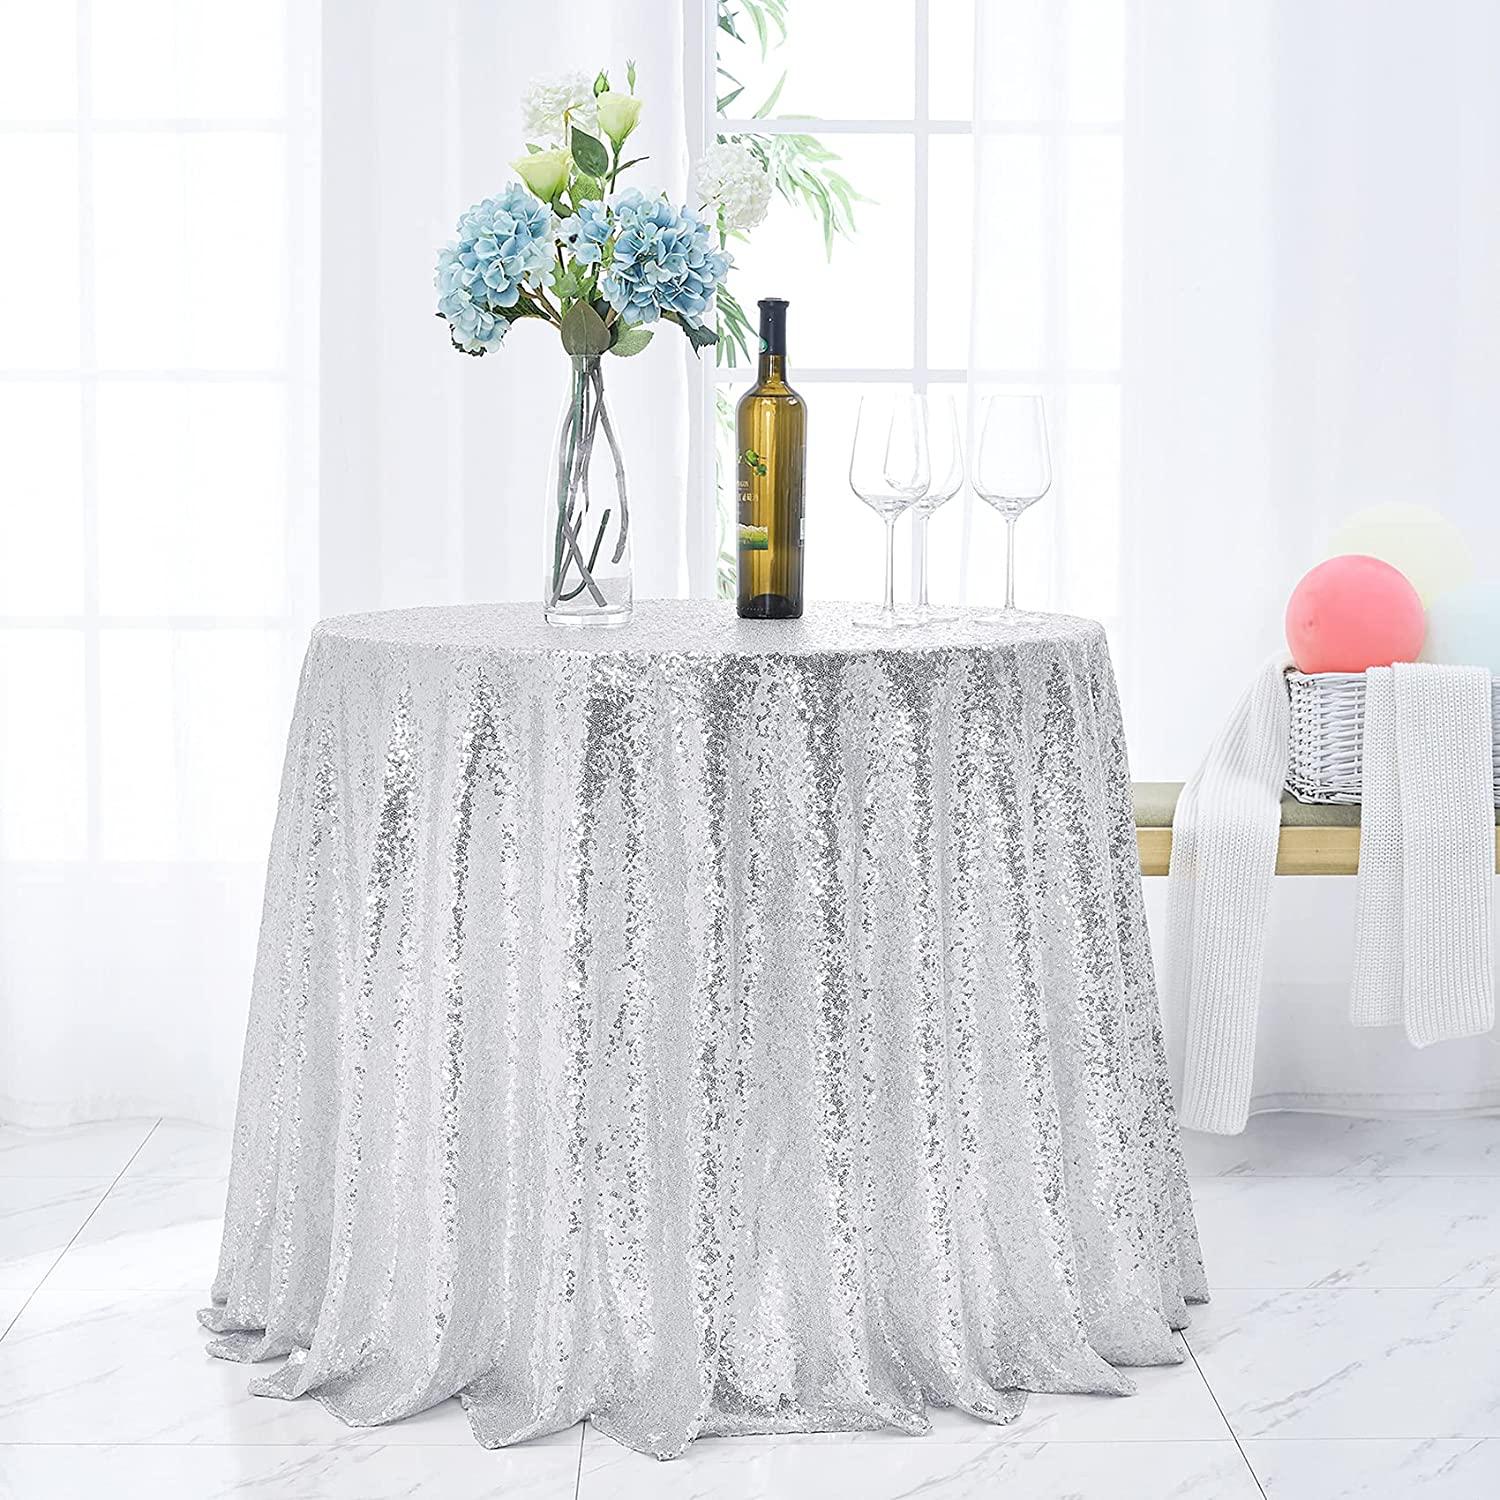 120 inch Round Sequin Tablecloth Wedding Arch, Glitter Tablecloth Arbor for Bridal Shower Decorations, Birthday, Wedding - If you say i do